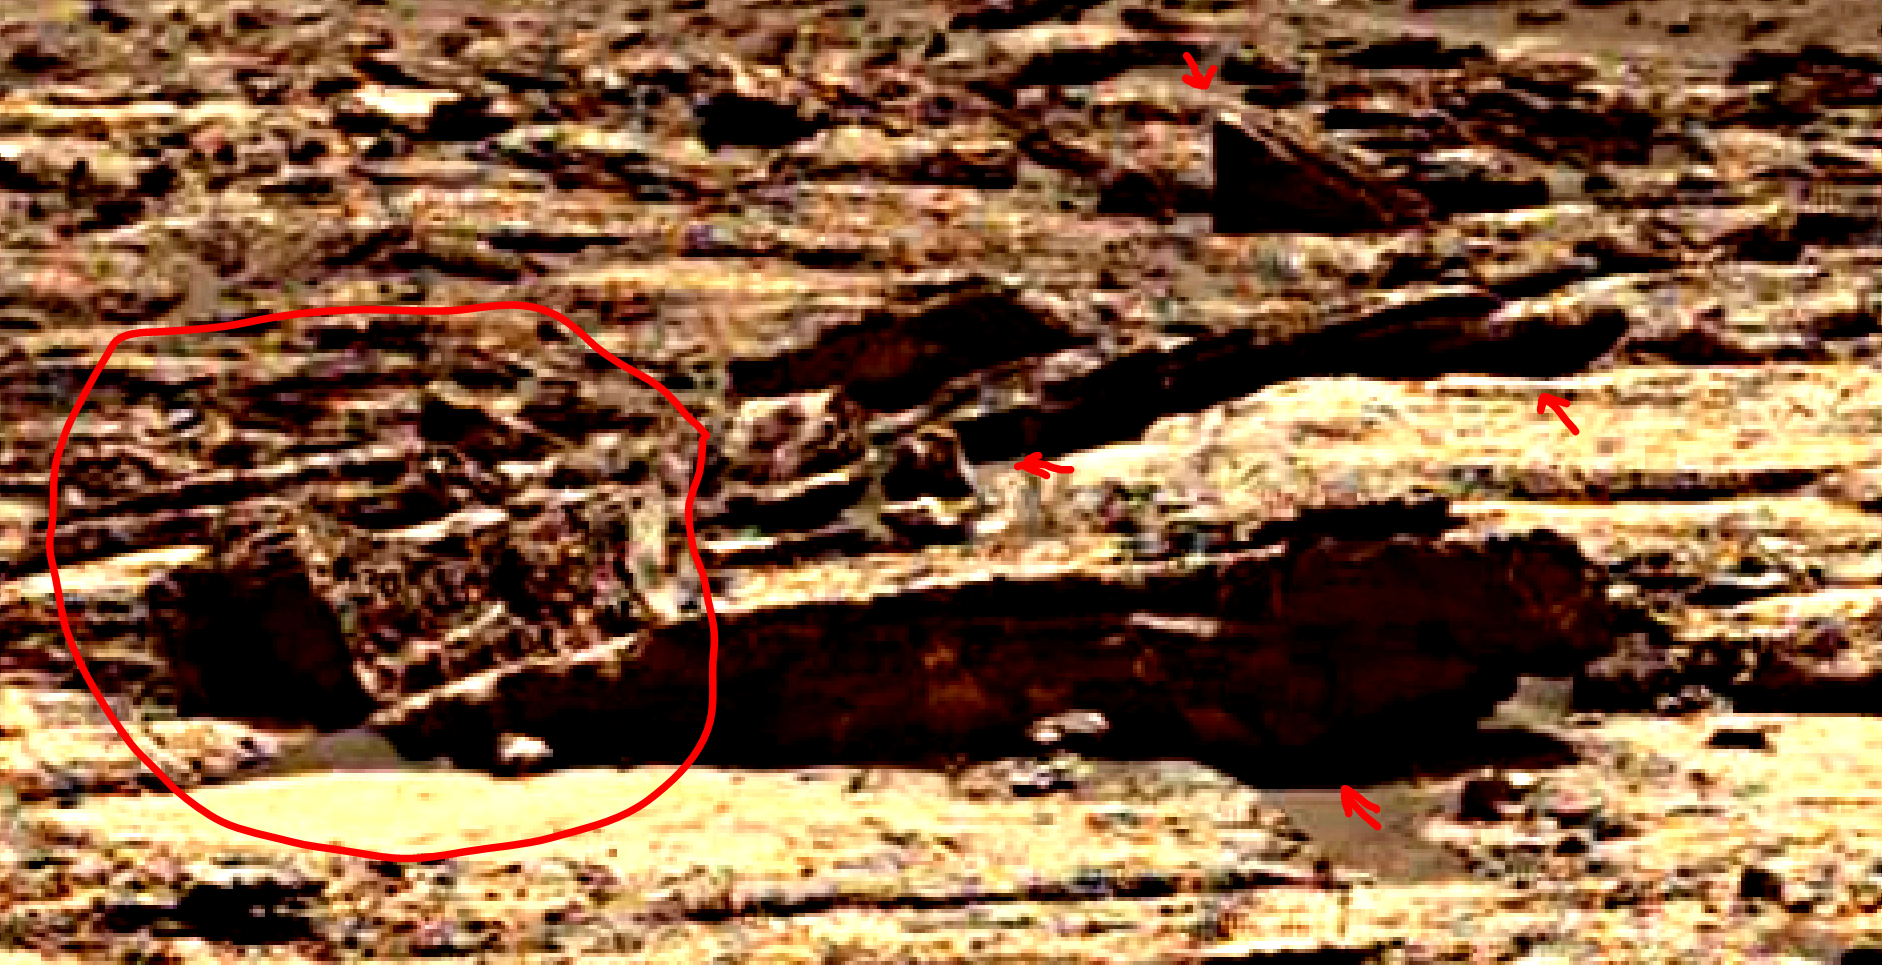 mars-sol-1489-anomaly-artifacts-3a-was-life-on-mars